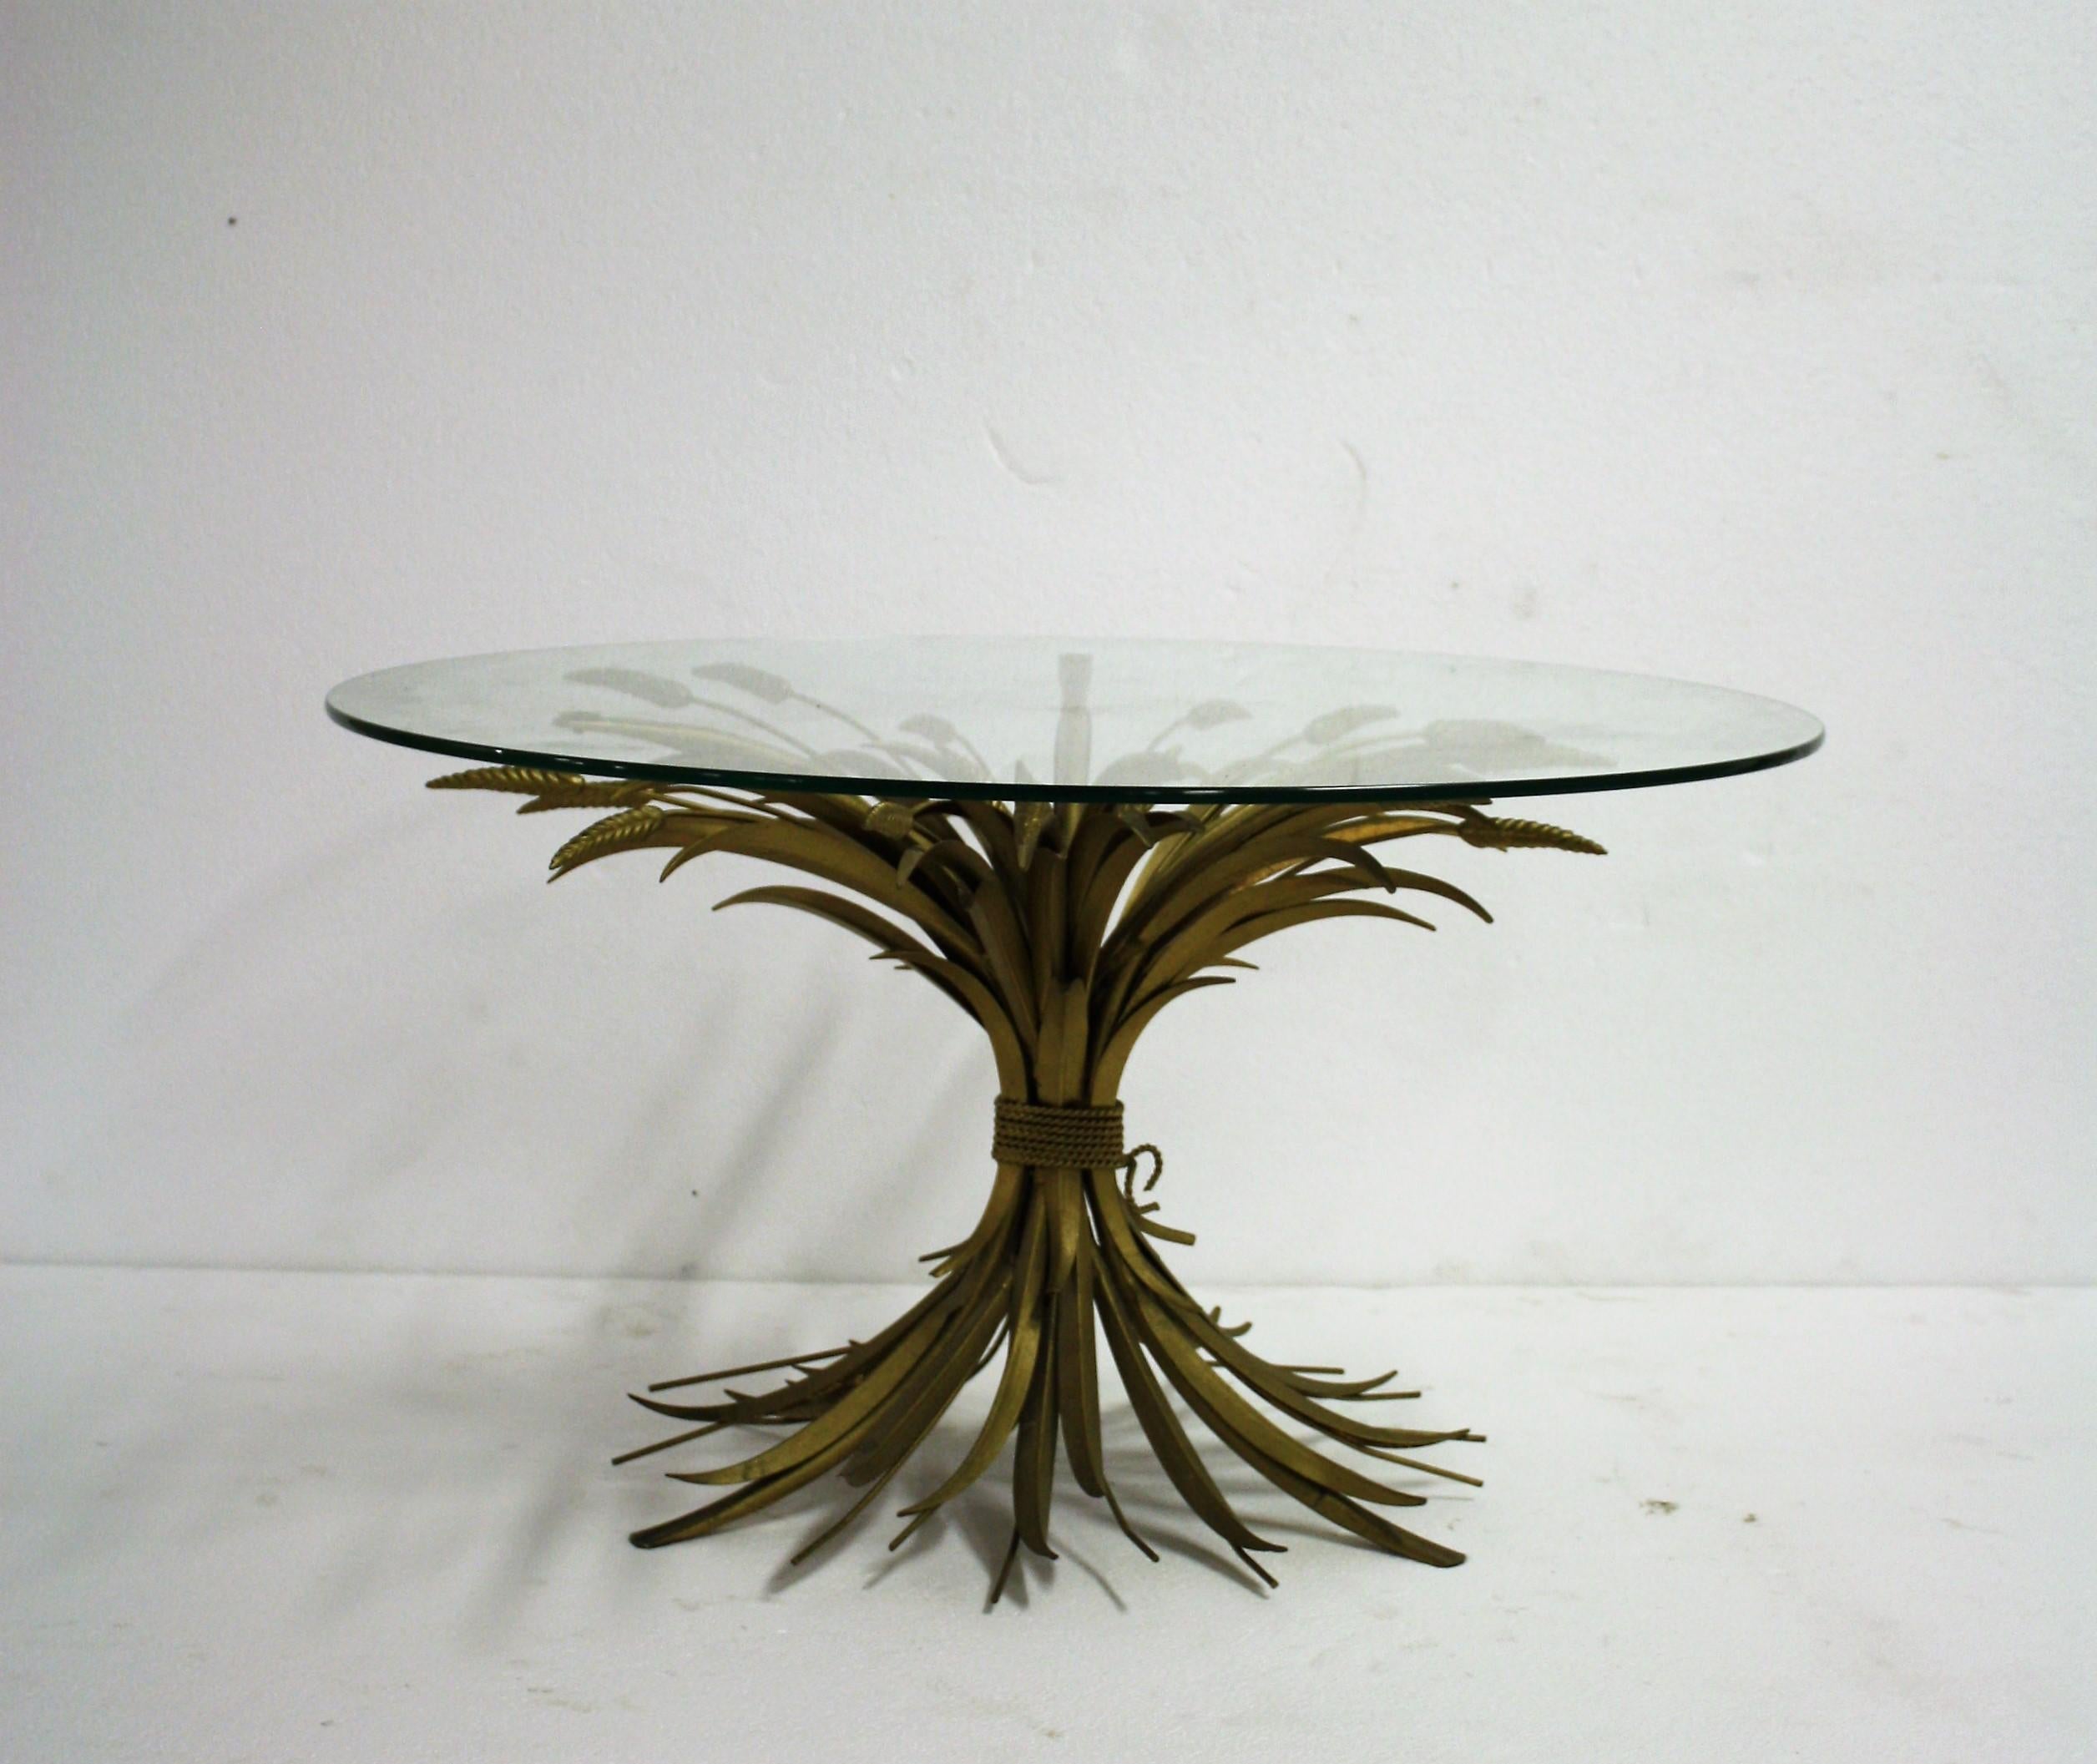 Vintage Gilt Metal Sheaf of Wheat Coco Chanel Side Table 1